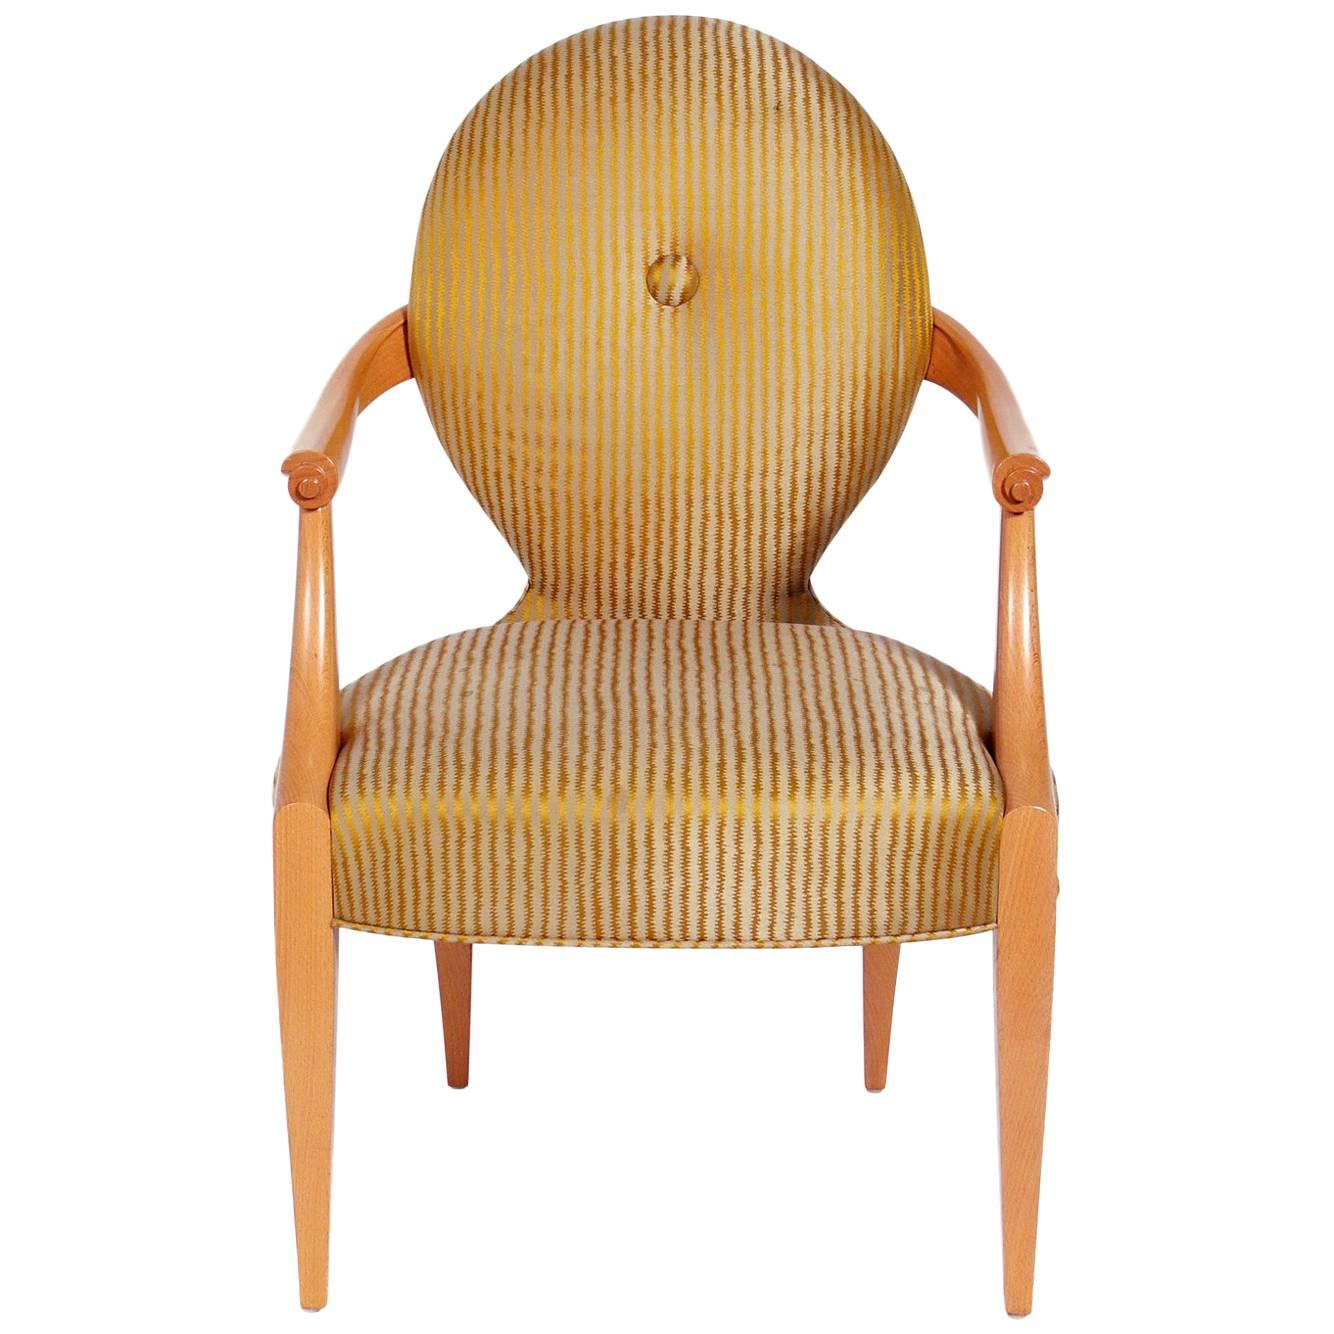 Elegant Armchair Designed by John Hutton for Donghia